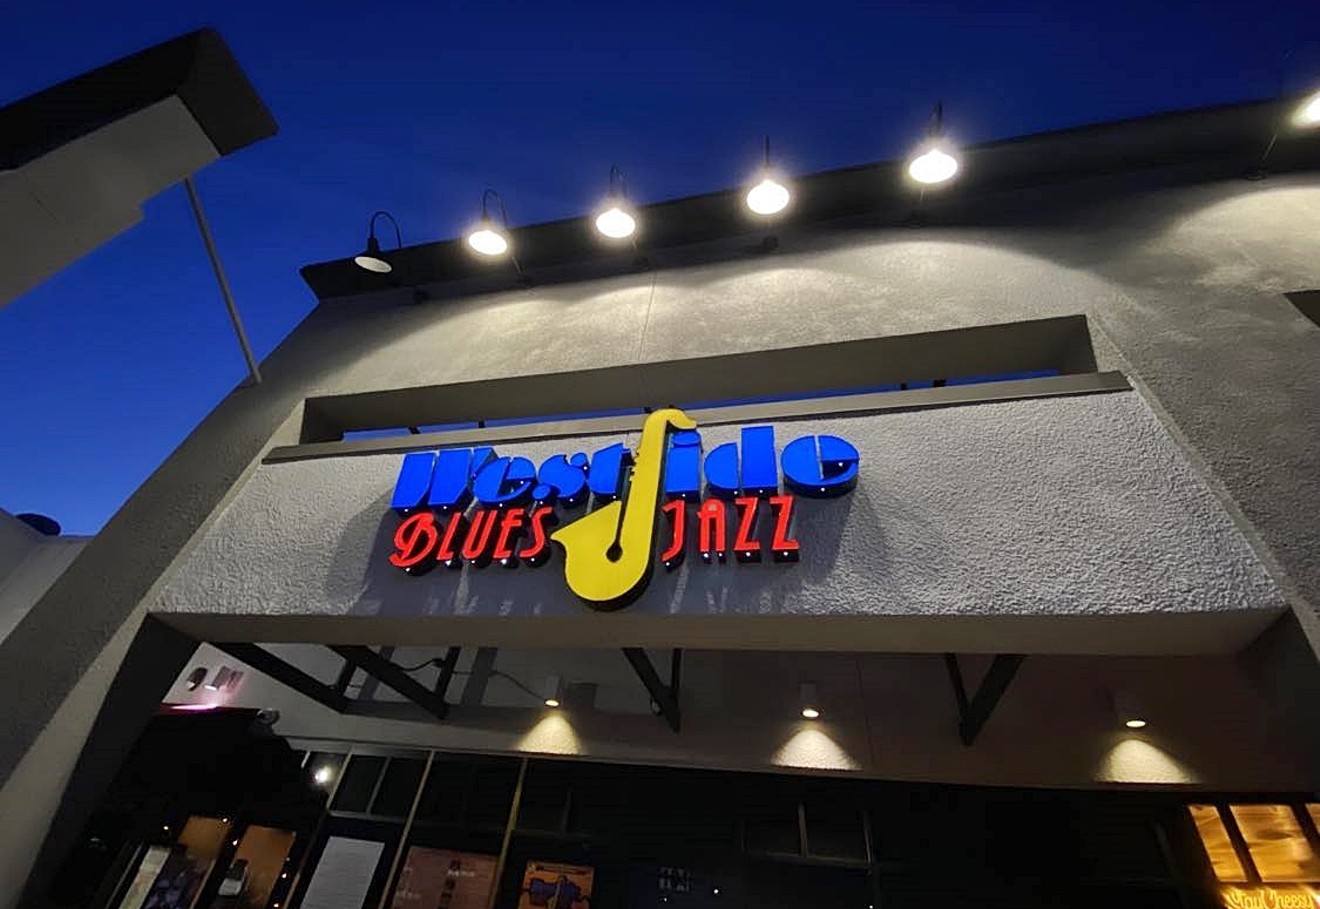 Westside Blues, Jazz & More in Glendale is set to reopen in February.